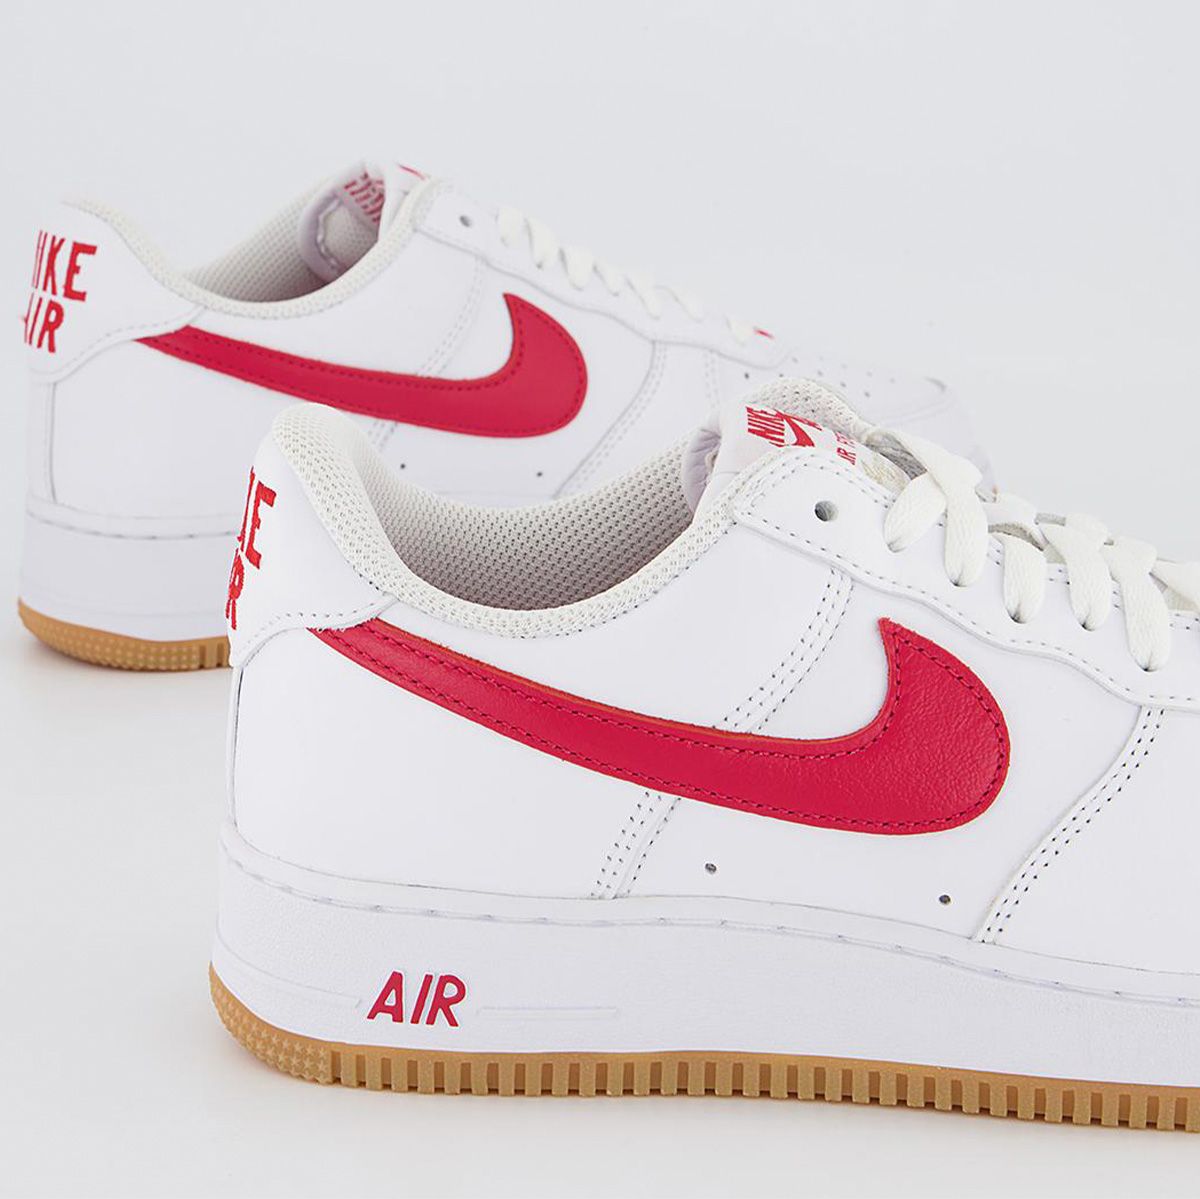 Nike af1 reveal Air Force 1 Low “Since '82” Revealed in Three New Colorways